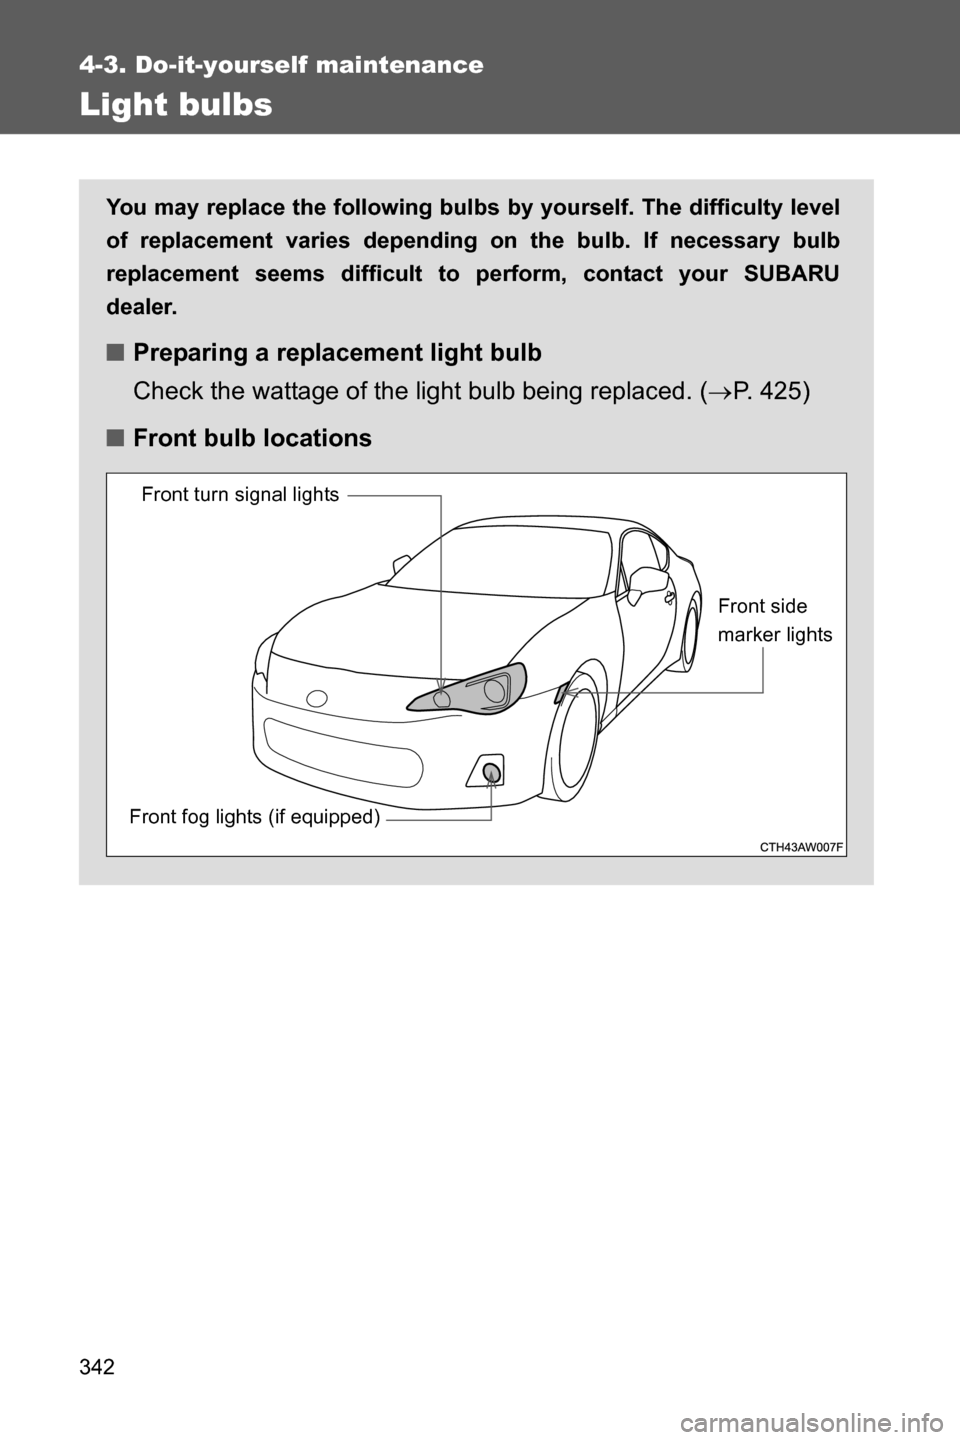 SUBARU BRZ 2016 1.G Owners Manual 342
4-3. Do-it-yourself maintenance
Light bulbs
You may replace the following bulbs by yourself. The difficulty level
of replacement varies depending on the bulb. If necessary bulb
replacement seems d